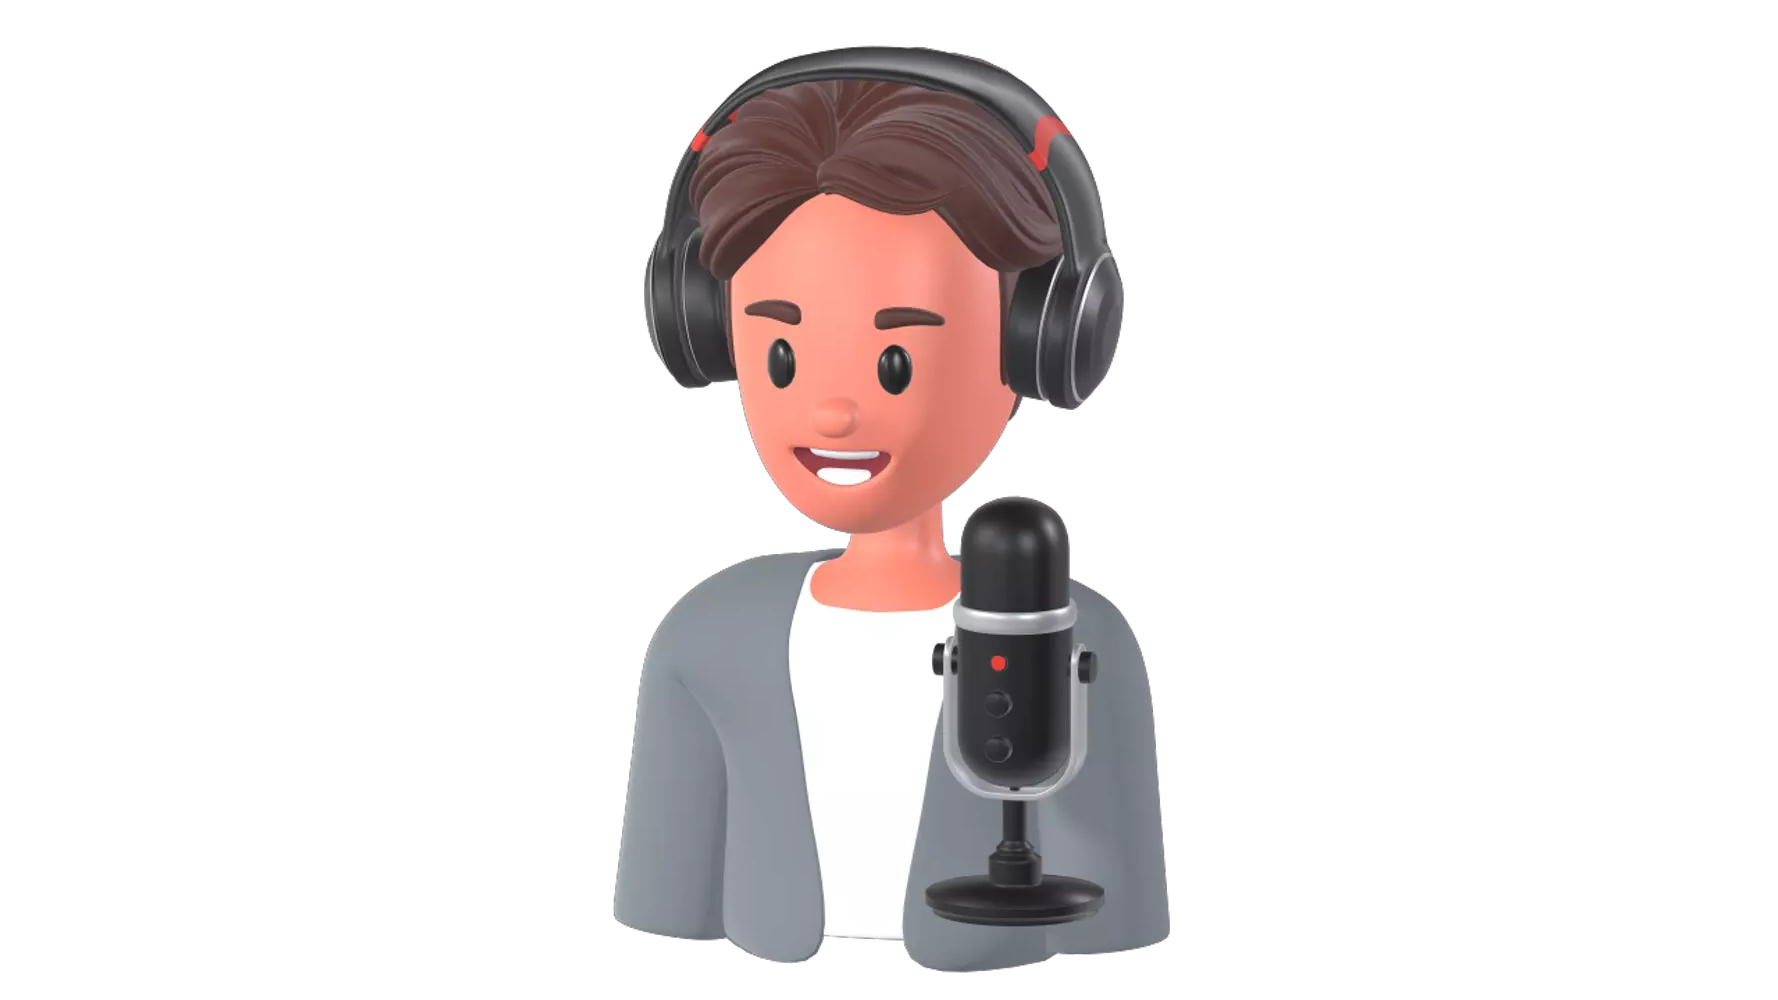 Podcaster Man 3D Graphic